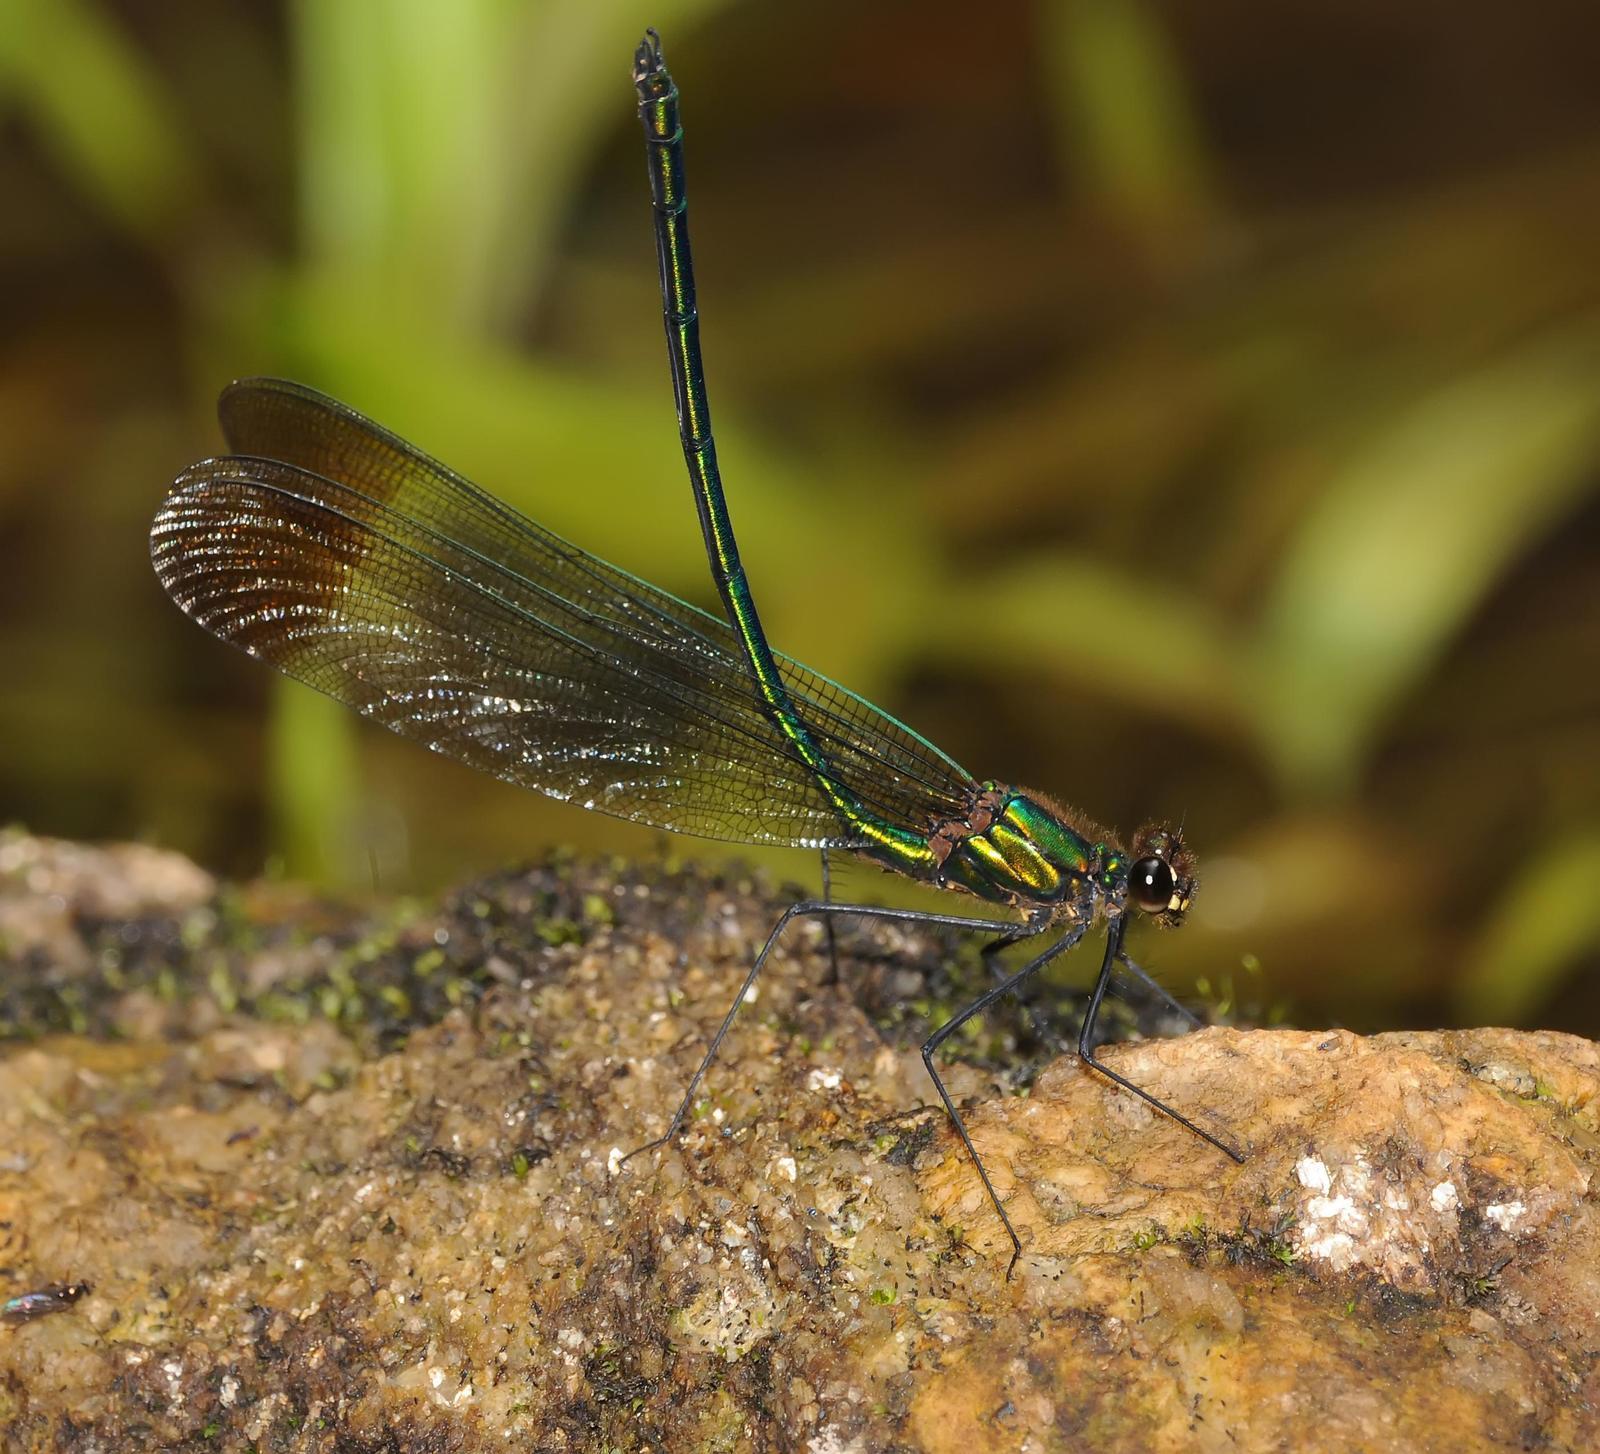 Superb Jewelwing Photo by marion dobbs